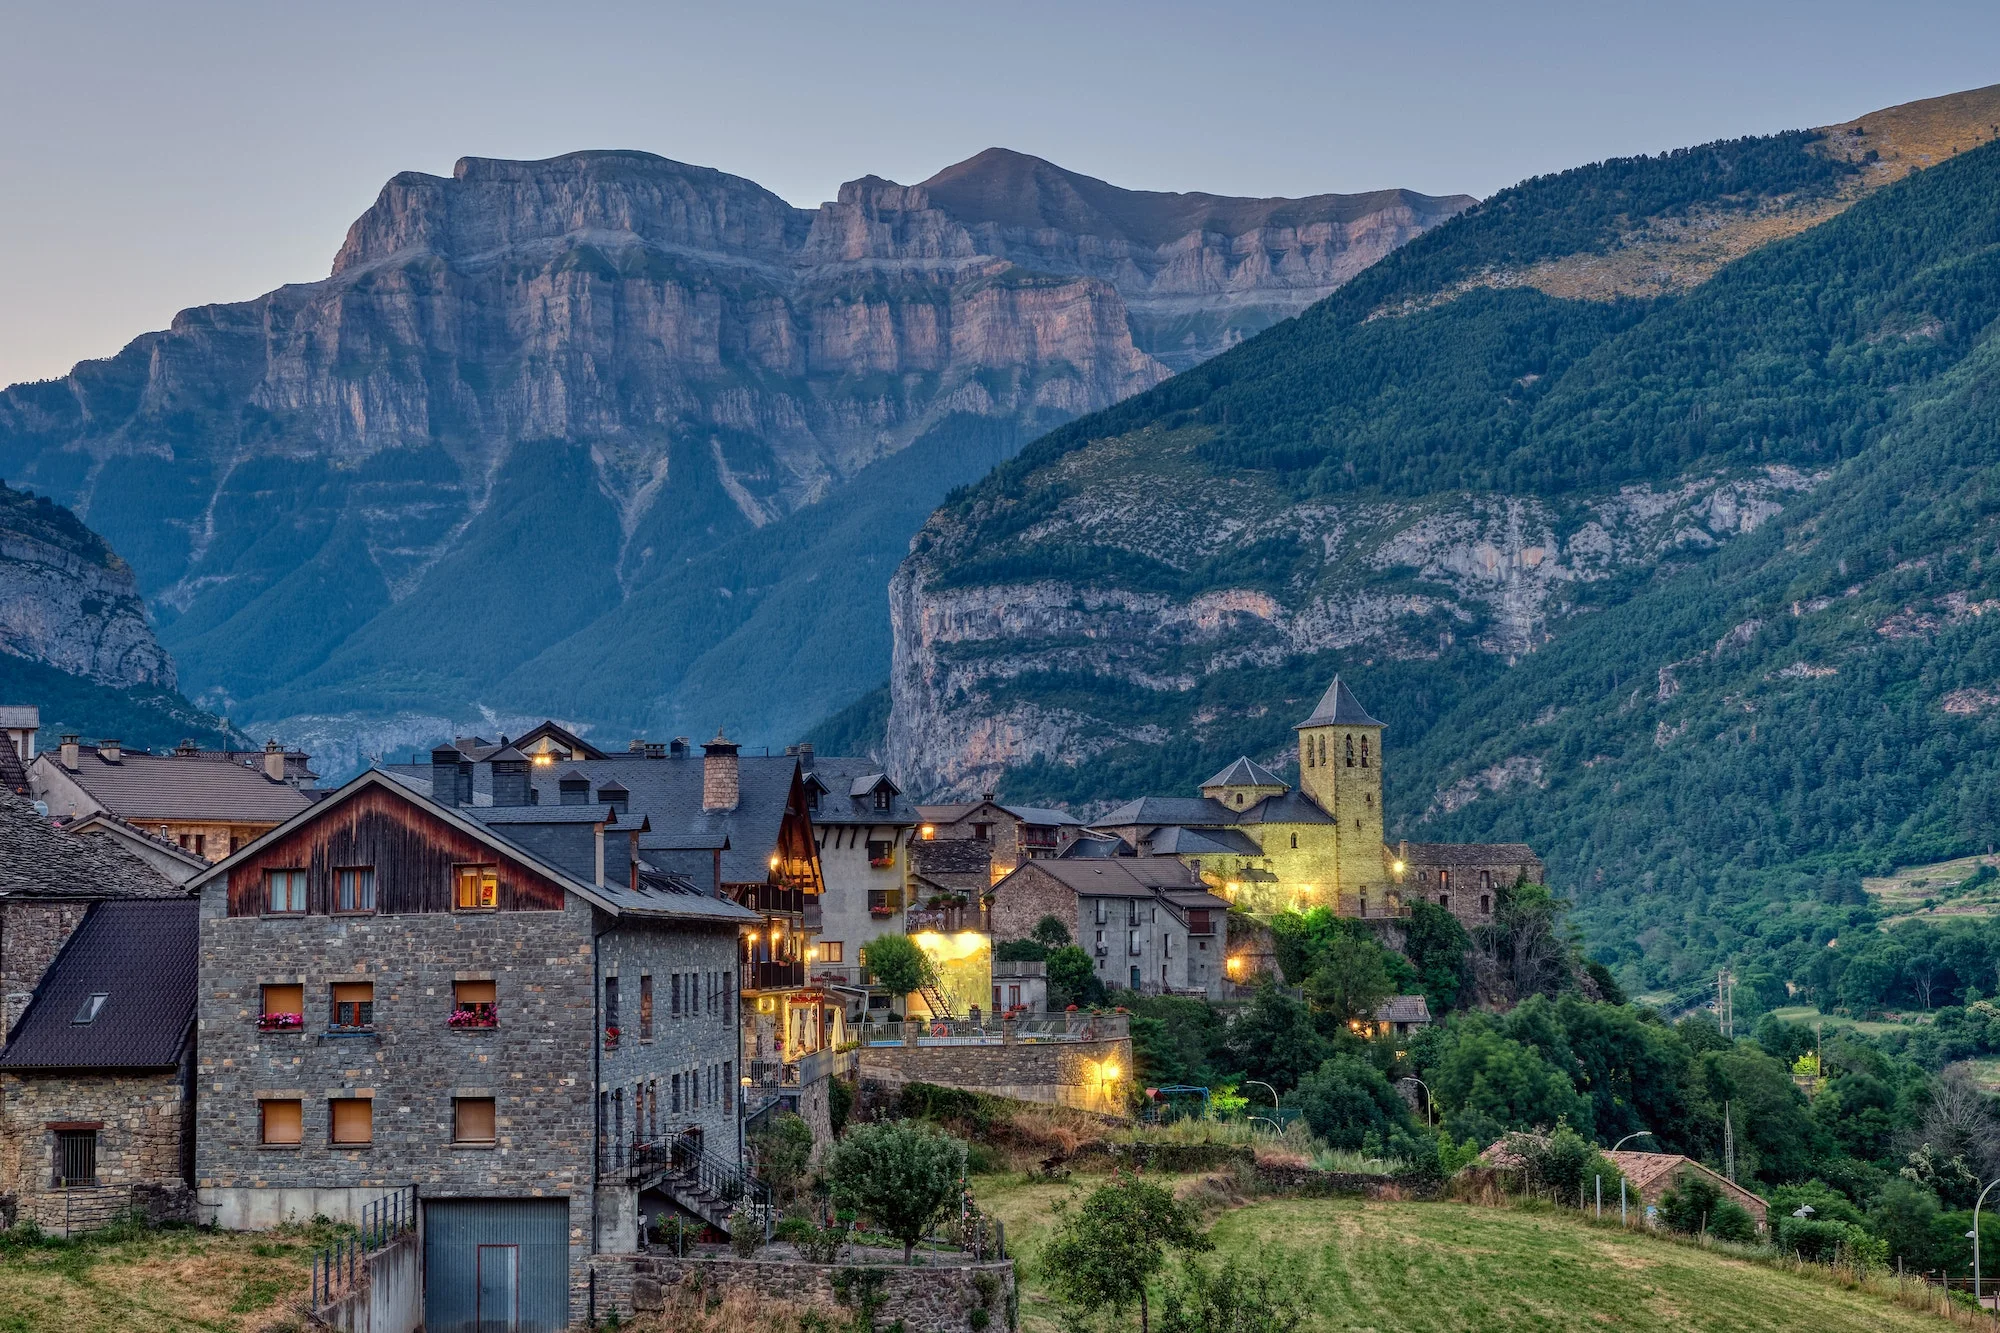 The beautiful village of Torla in the spanisch Pyrenees